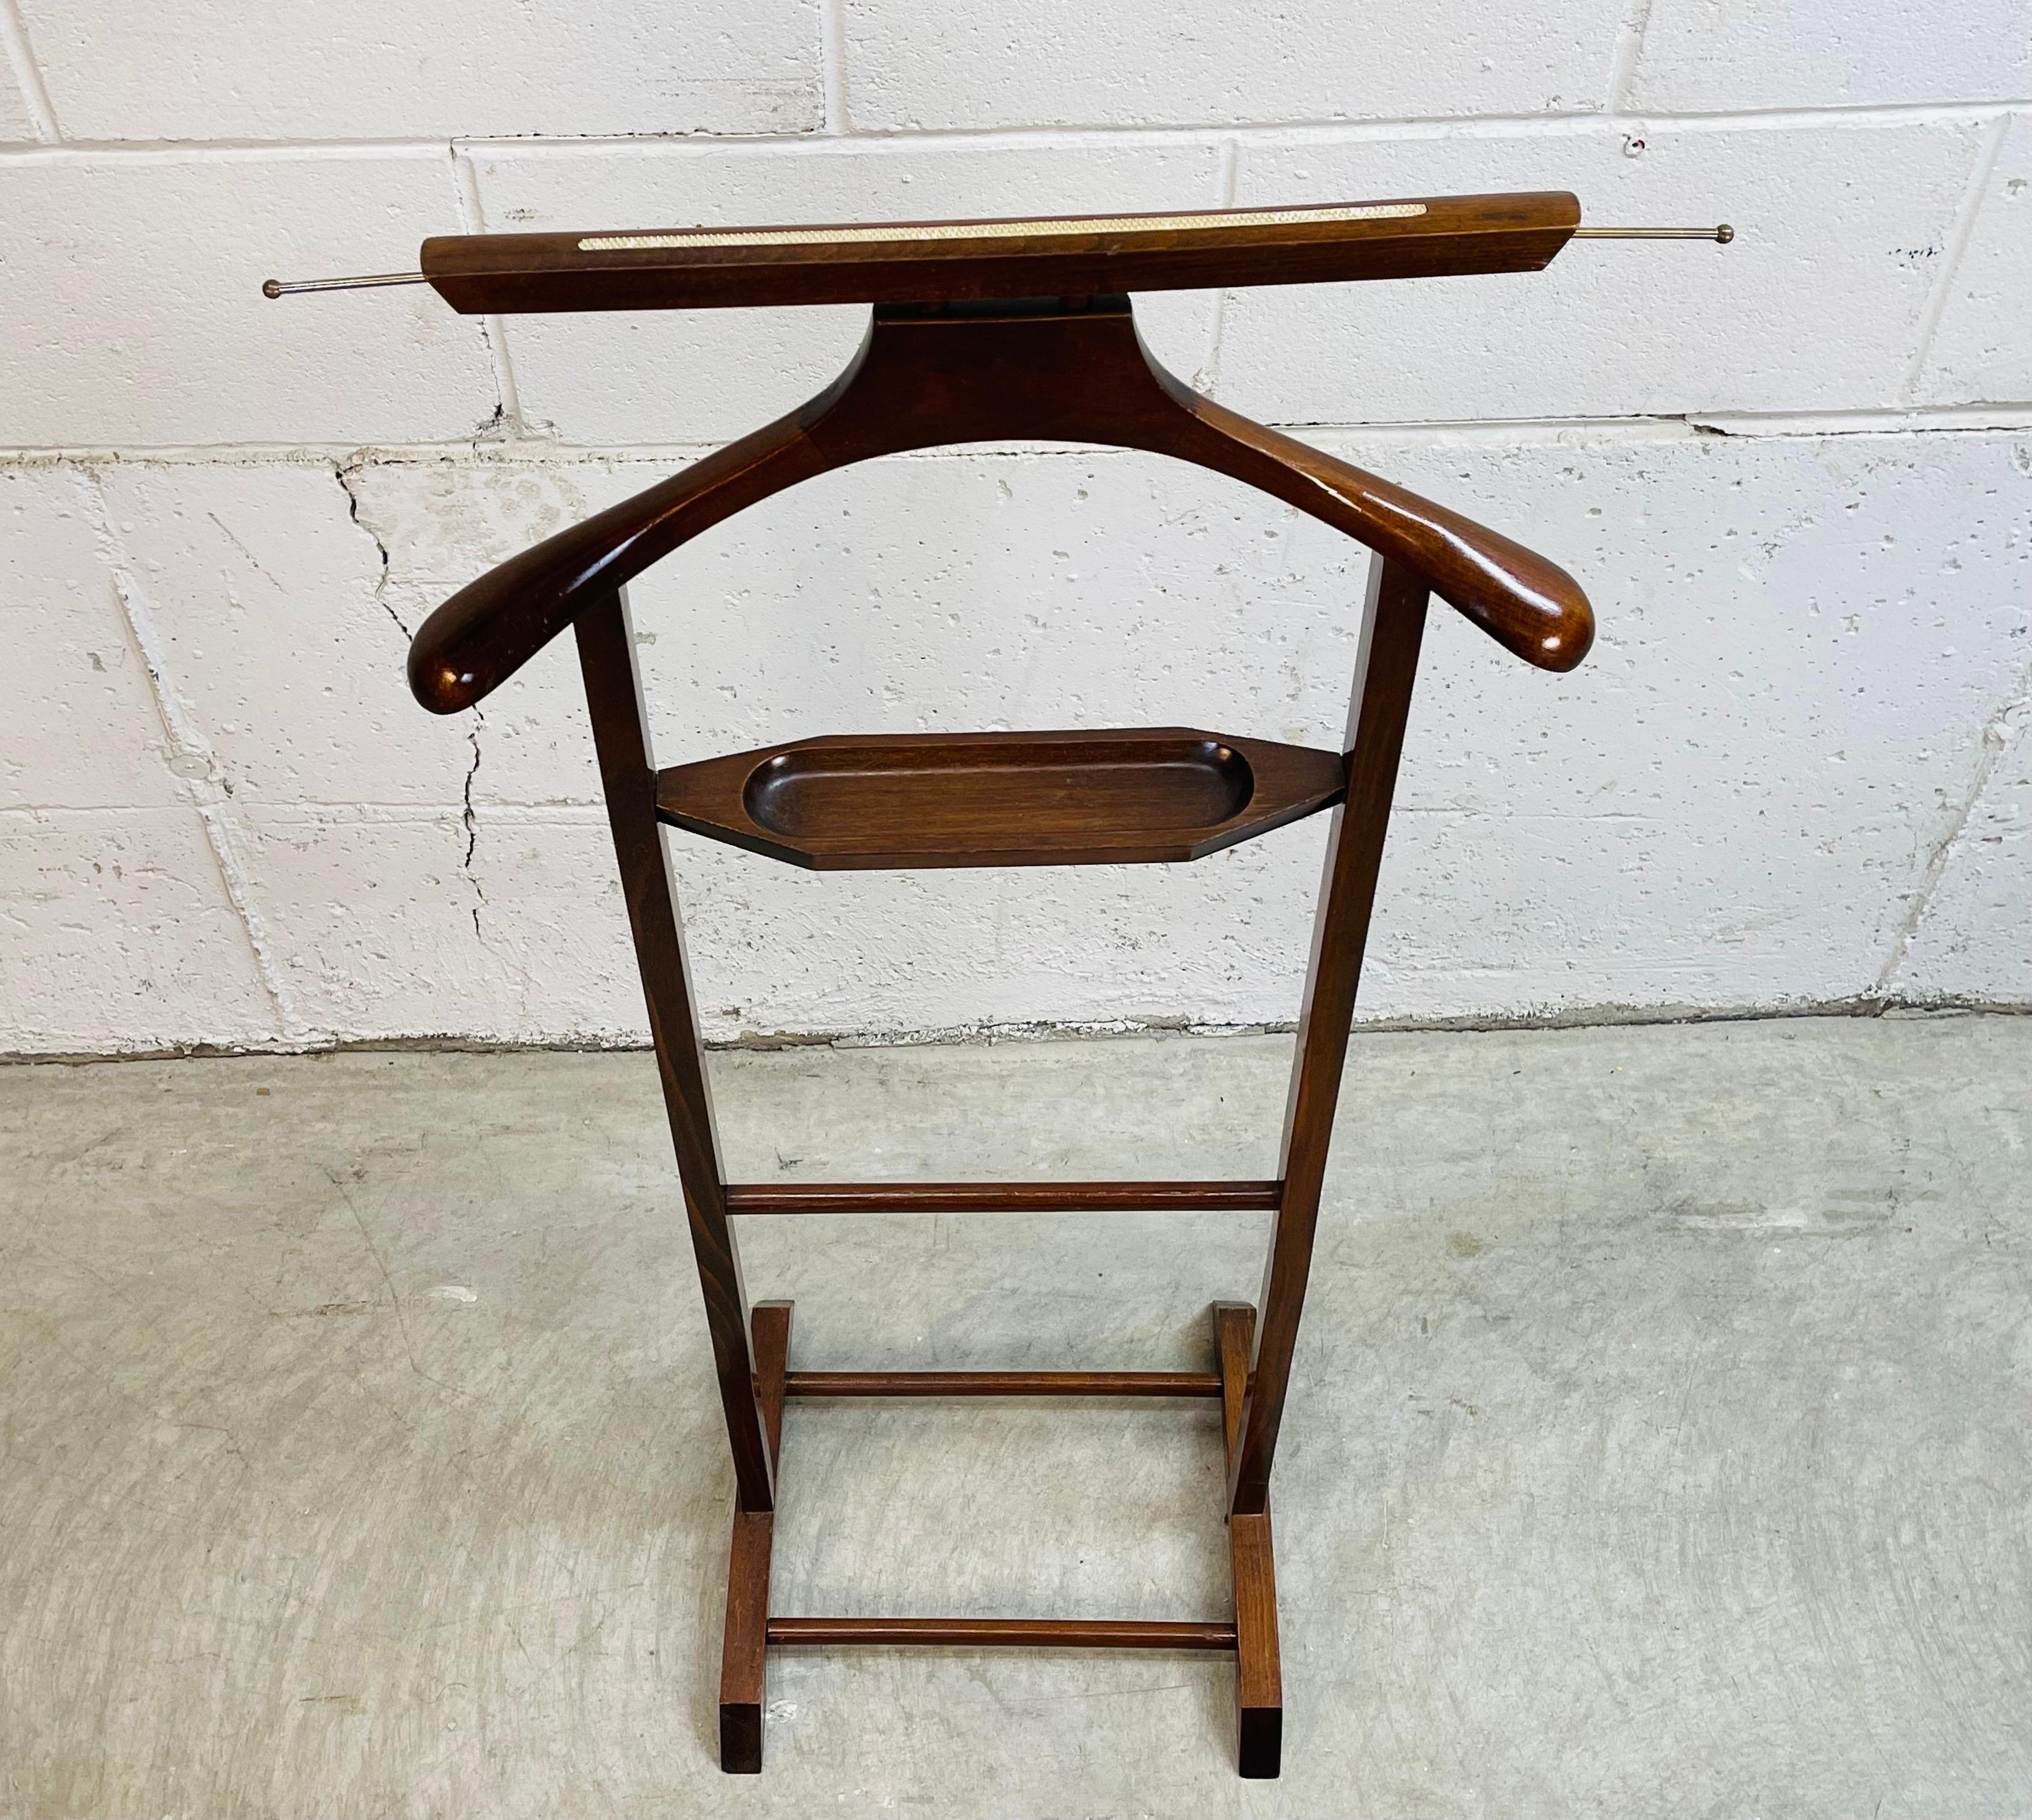 Vintage 1960s Italian maple wood men’s bedroom valet stand. Comes with retractable hooks and a change shelf. Marked Made in Italy underneath.